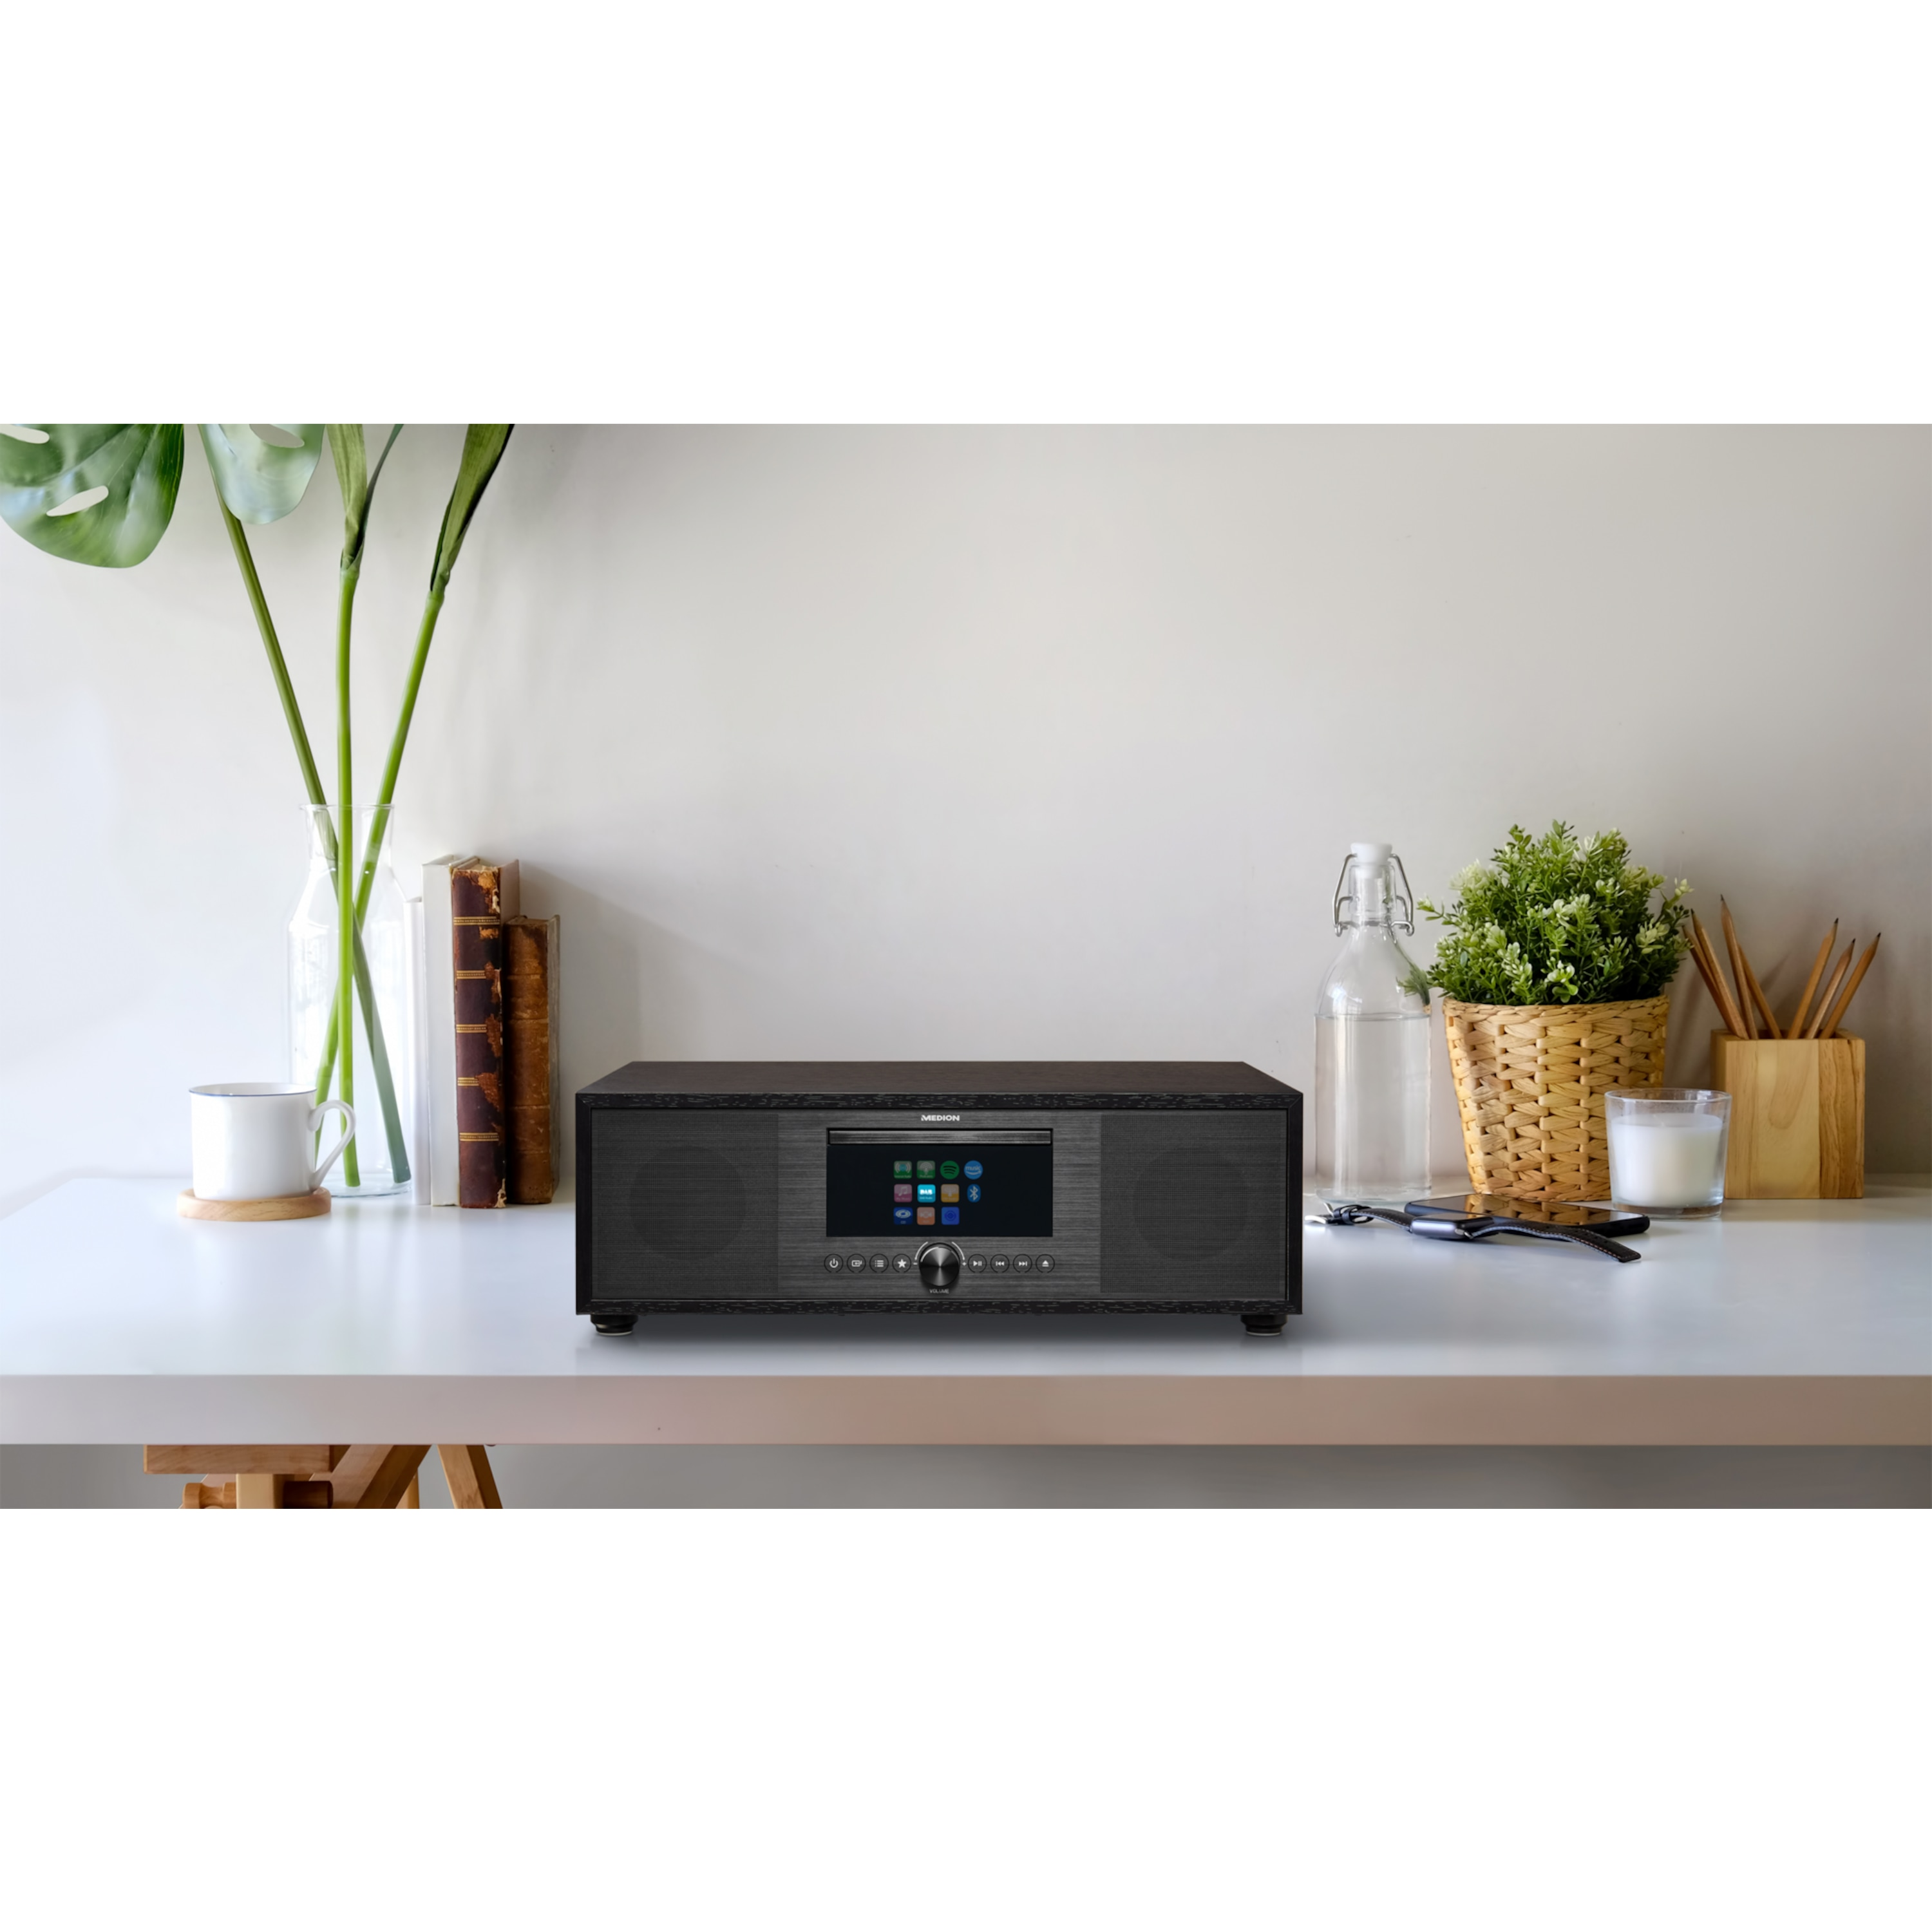 MEDION LIFE® CD/MP3- WLAN System, Player, All-in-One Radio, anthrazit P66400 Internet/DAB+/PLL-UKW Bluetooth®, Internetradio, KW, Audio